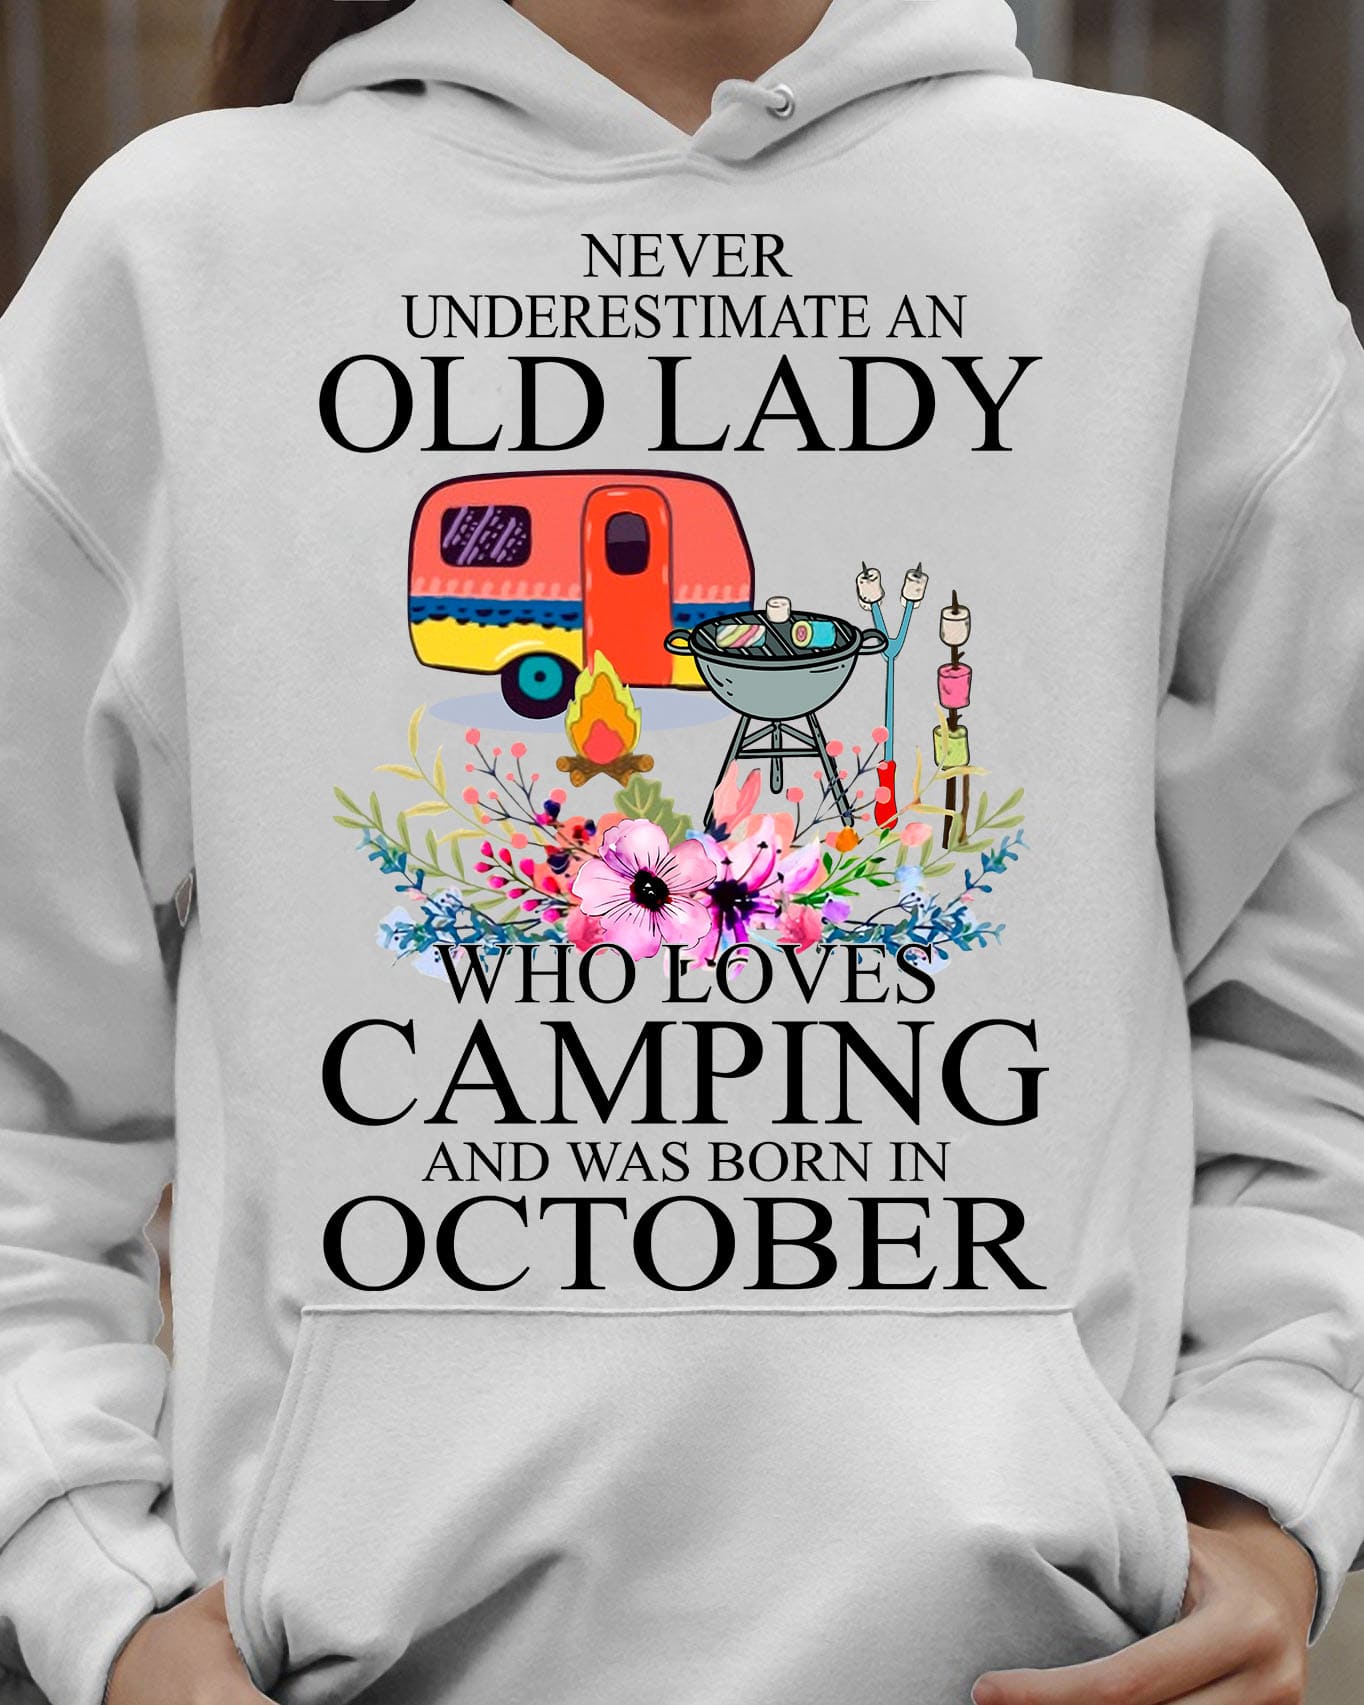 Never underestimate an old lady who loves camping and was born in October - Recreational vehicle T-shirt